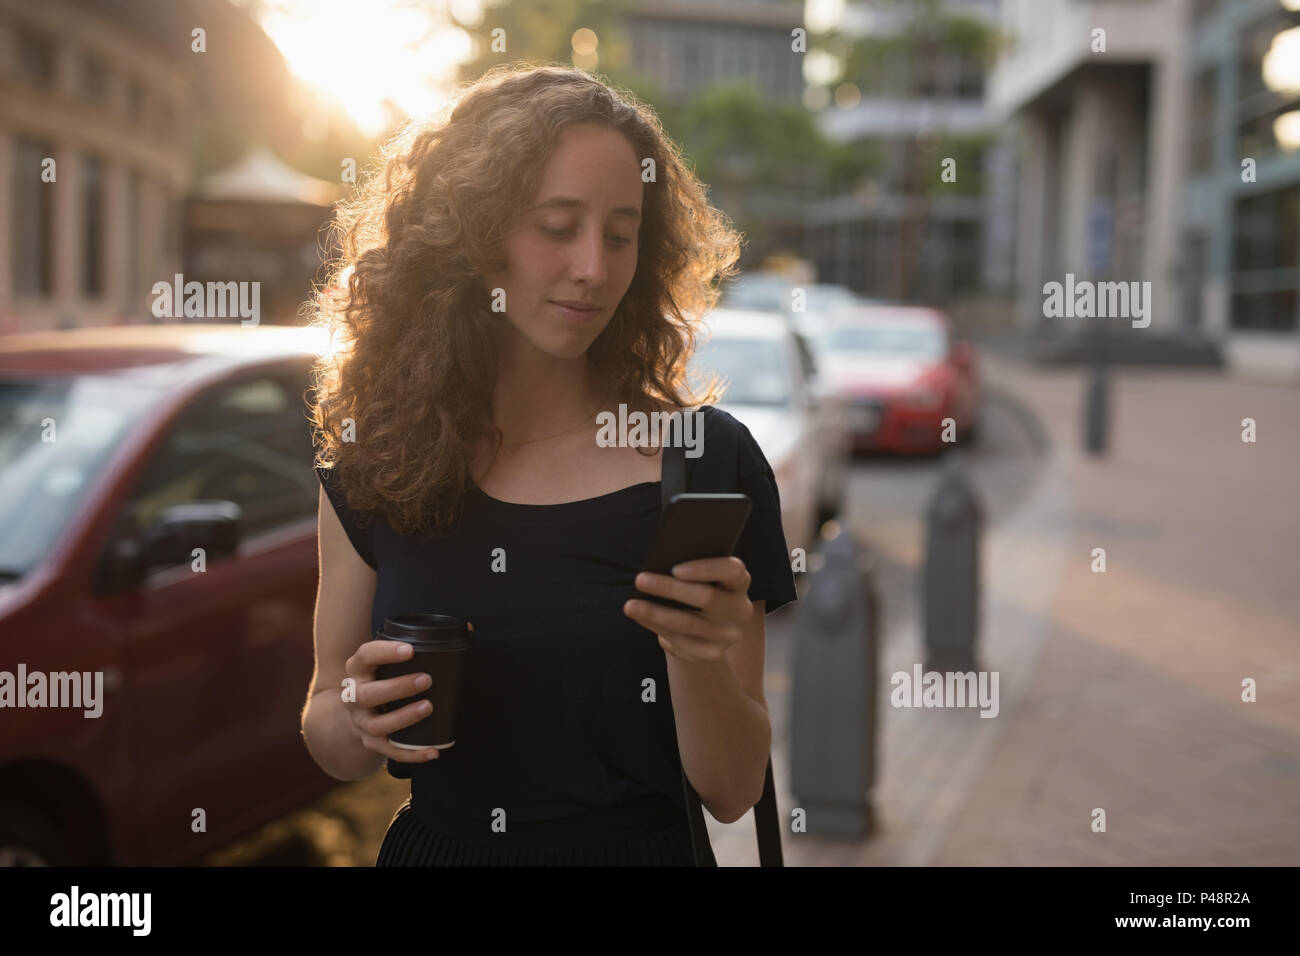 Beautiful woman using mobile phone Banque D'Images